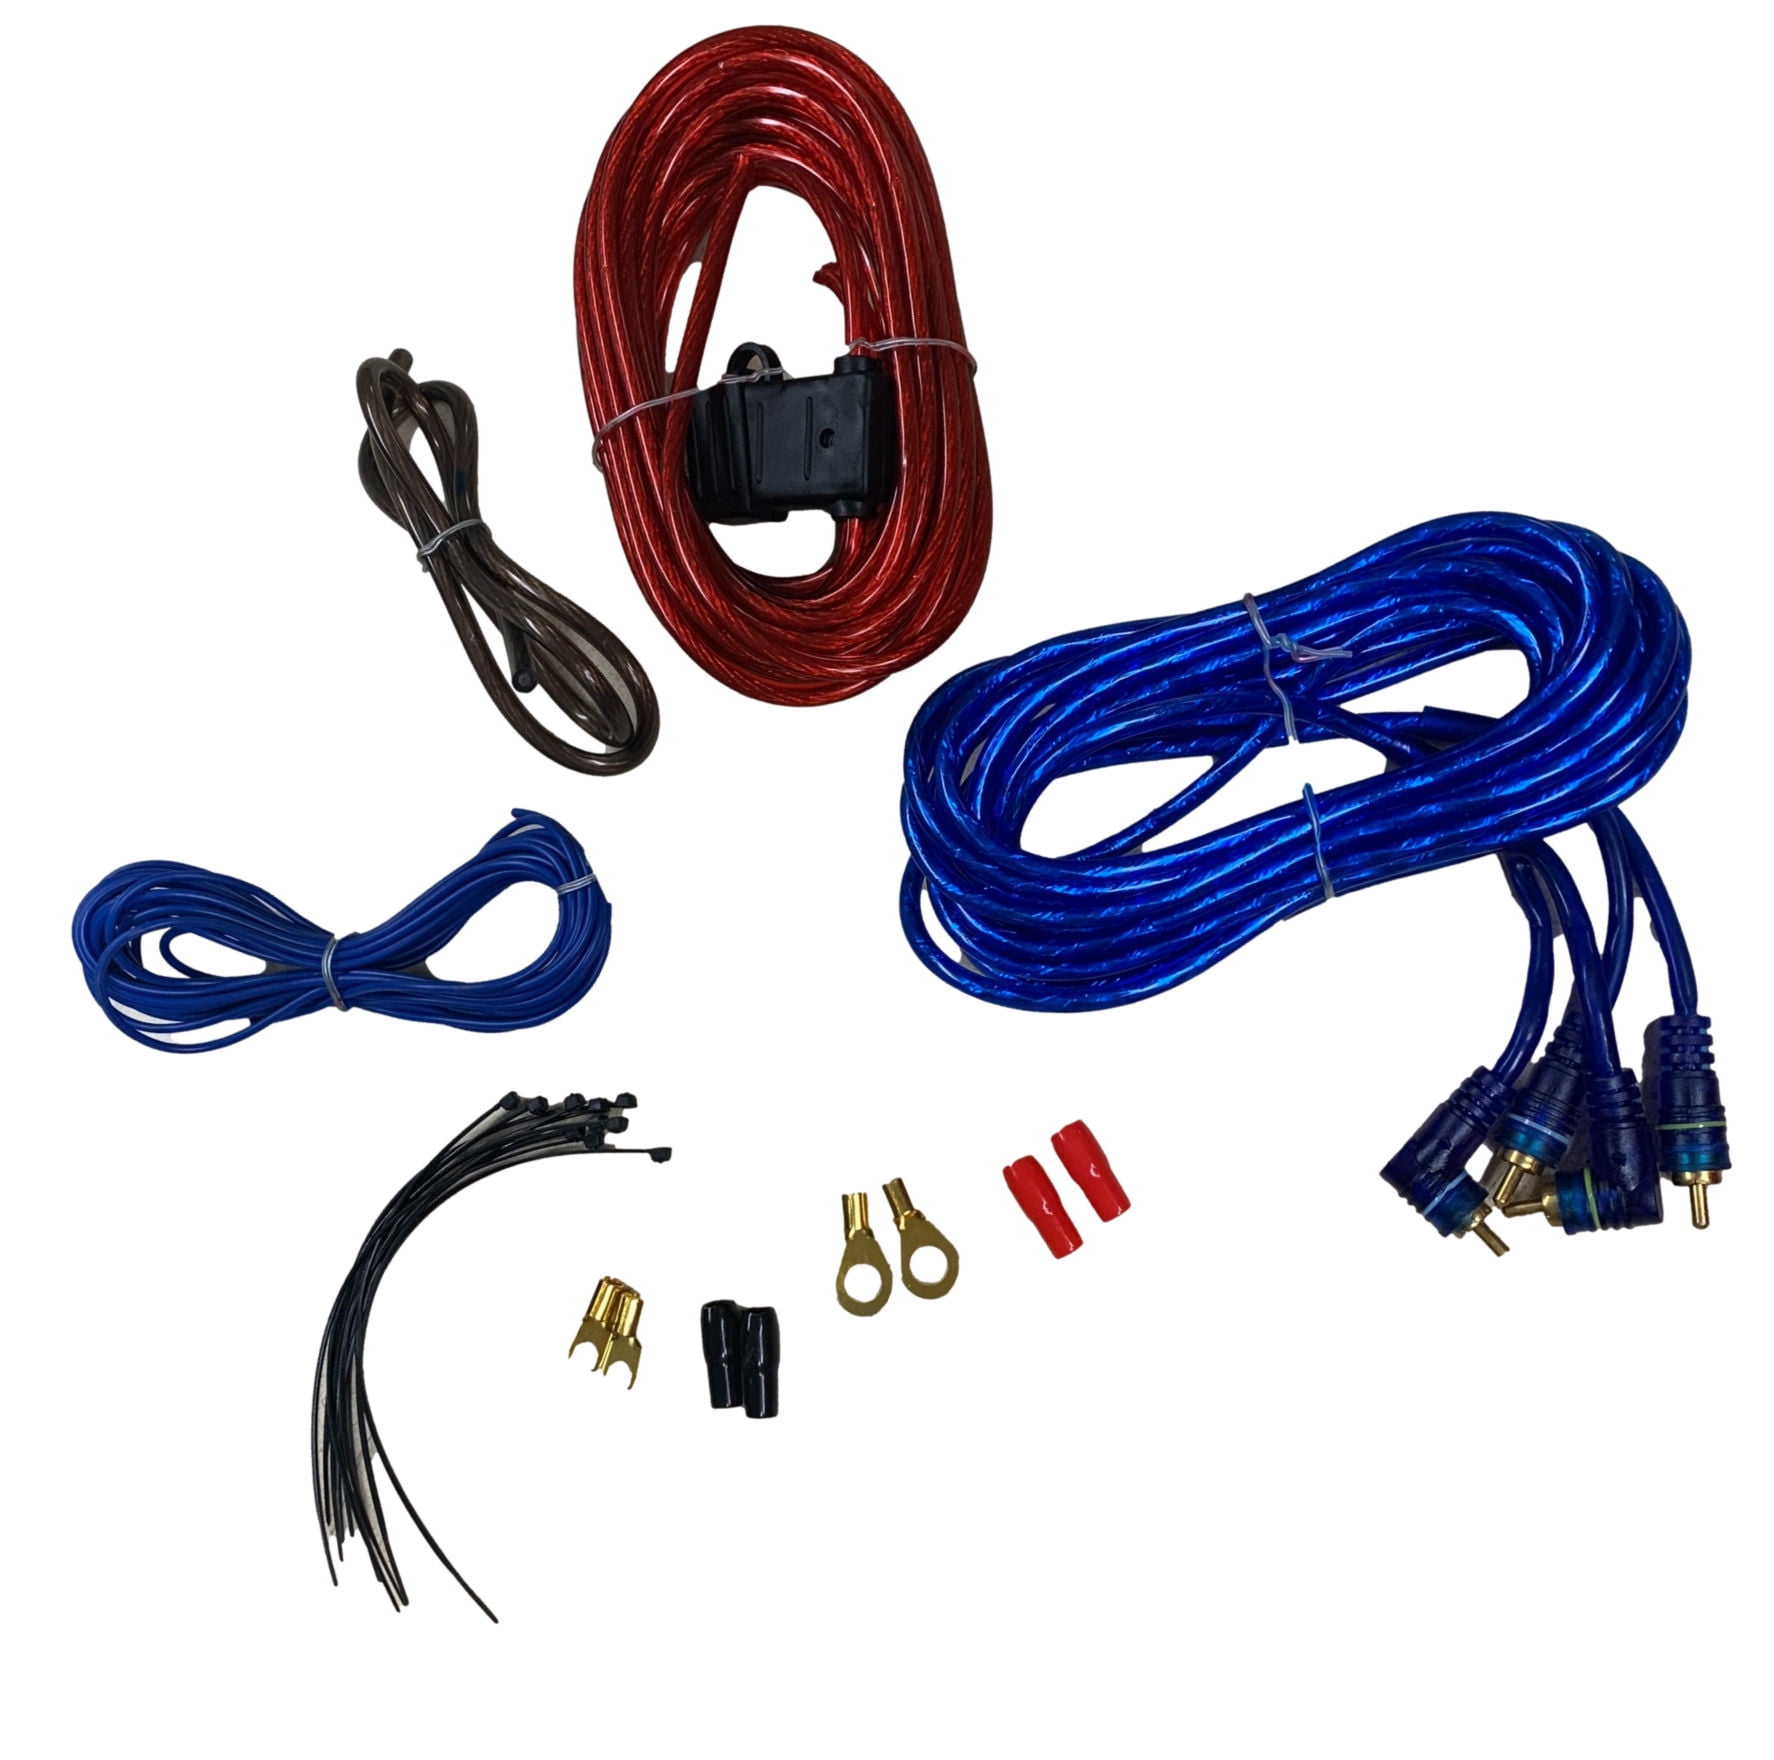 8 Gauge Amp Kit Amplifier Install Wiring Complete 8 Ga Installation Cables 1500W 